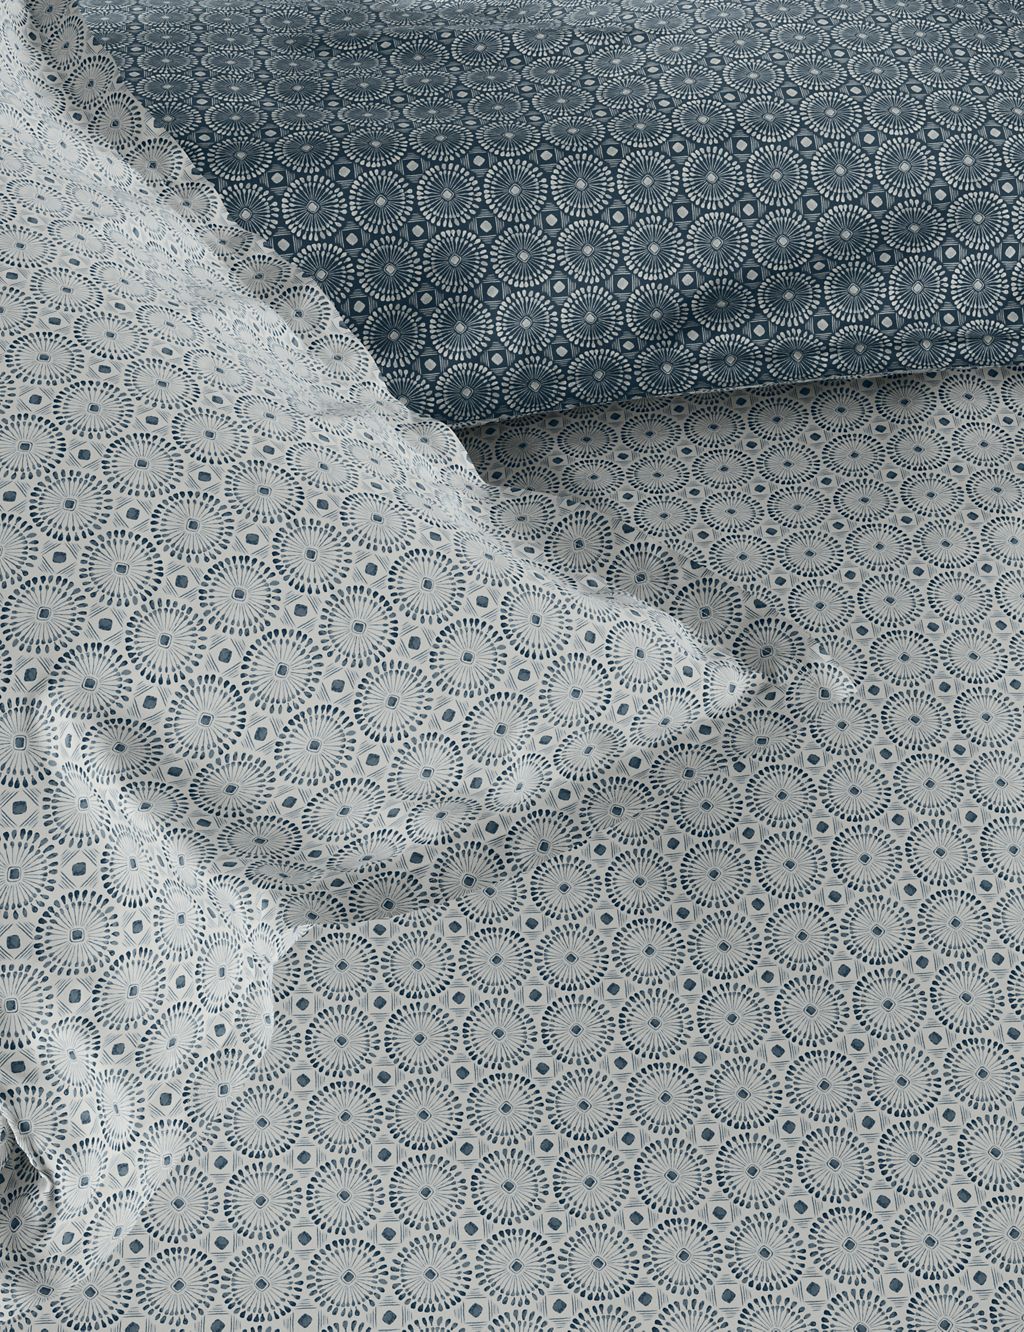 Seville Sidonia Brushed Cotton Bedding Set | M&S X Fired Earth | M&S